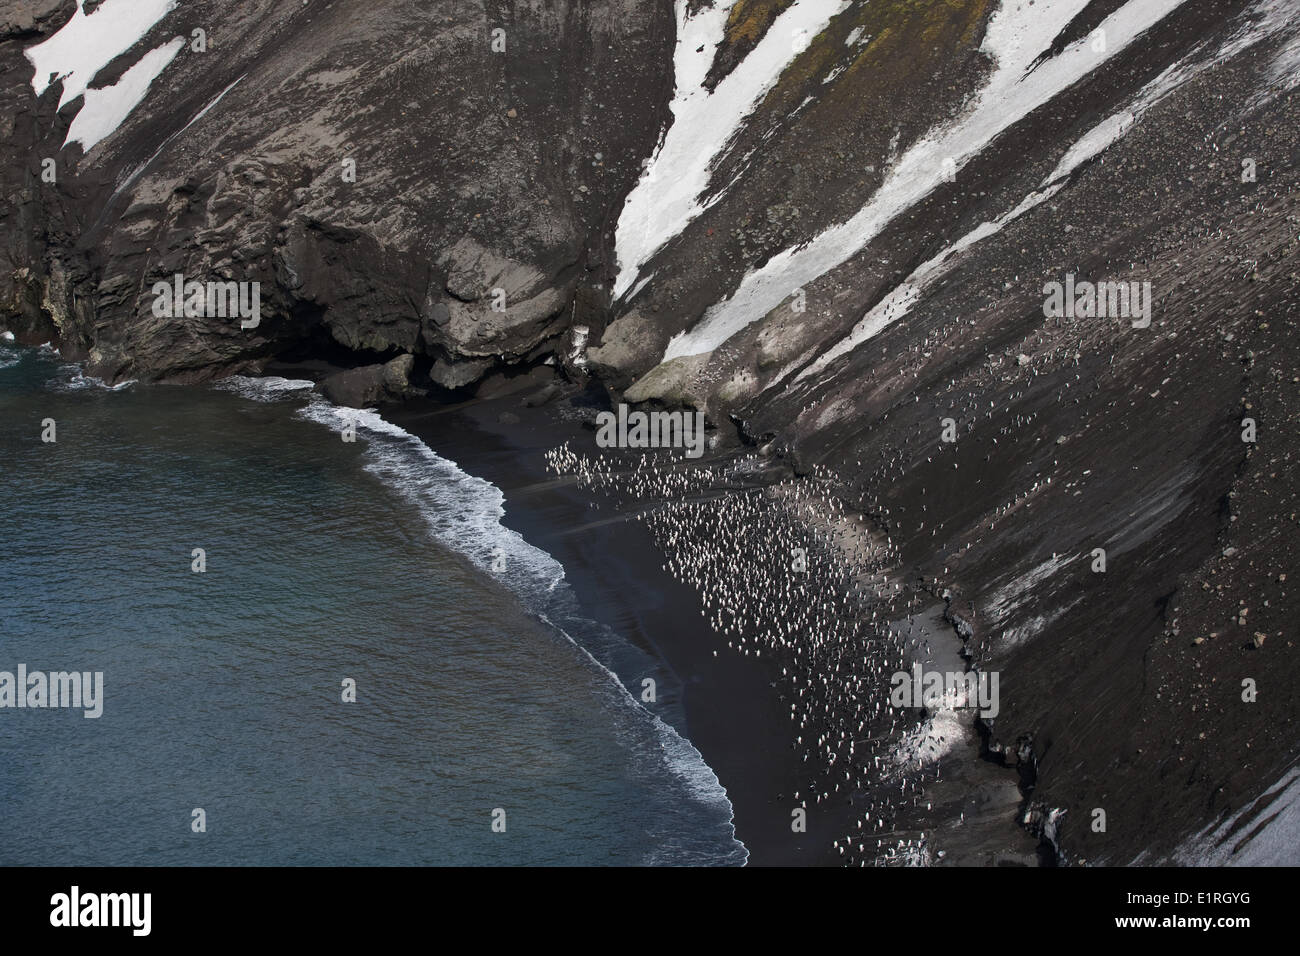 Looking down onto the dark ashy beach at Baily Head, Deception Island, where large numbers of Chinstrap Penguins (Pygoscelis Stock Photo